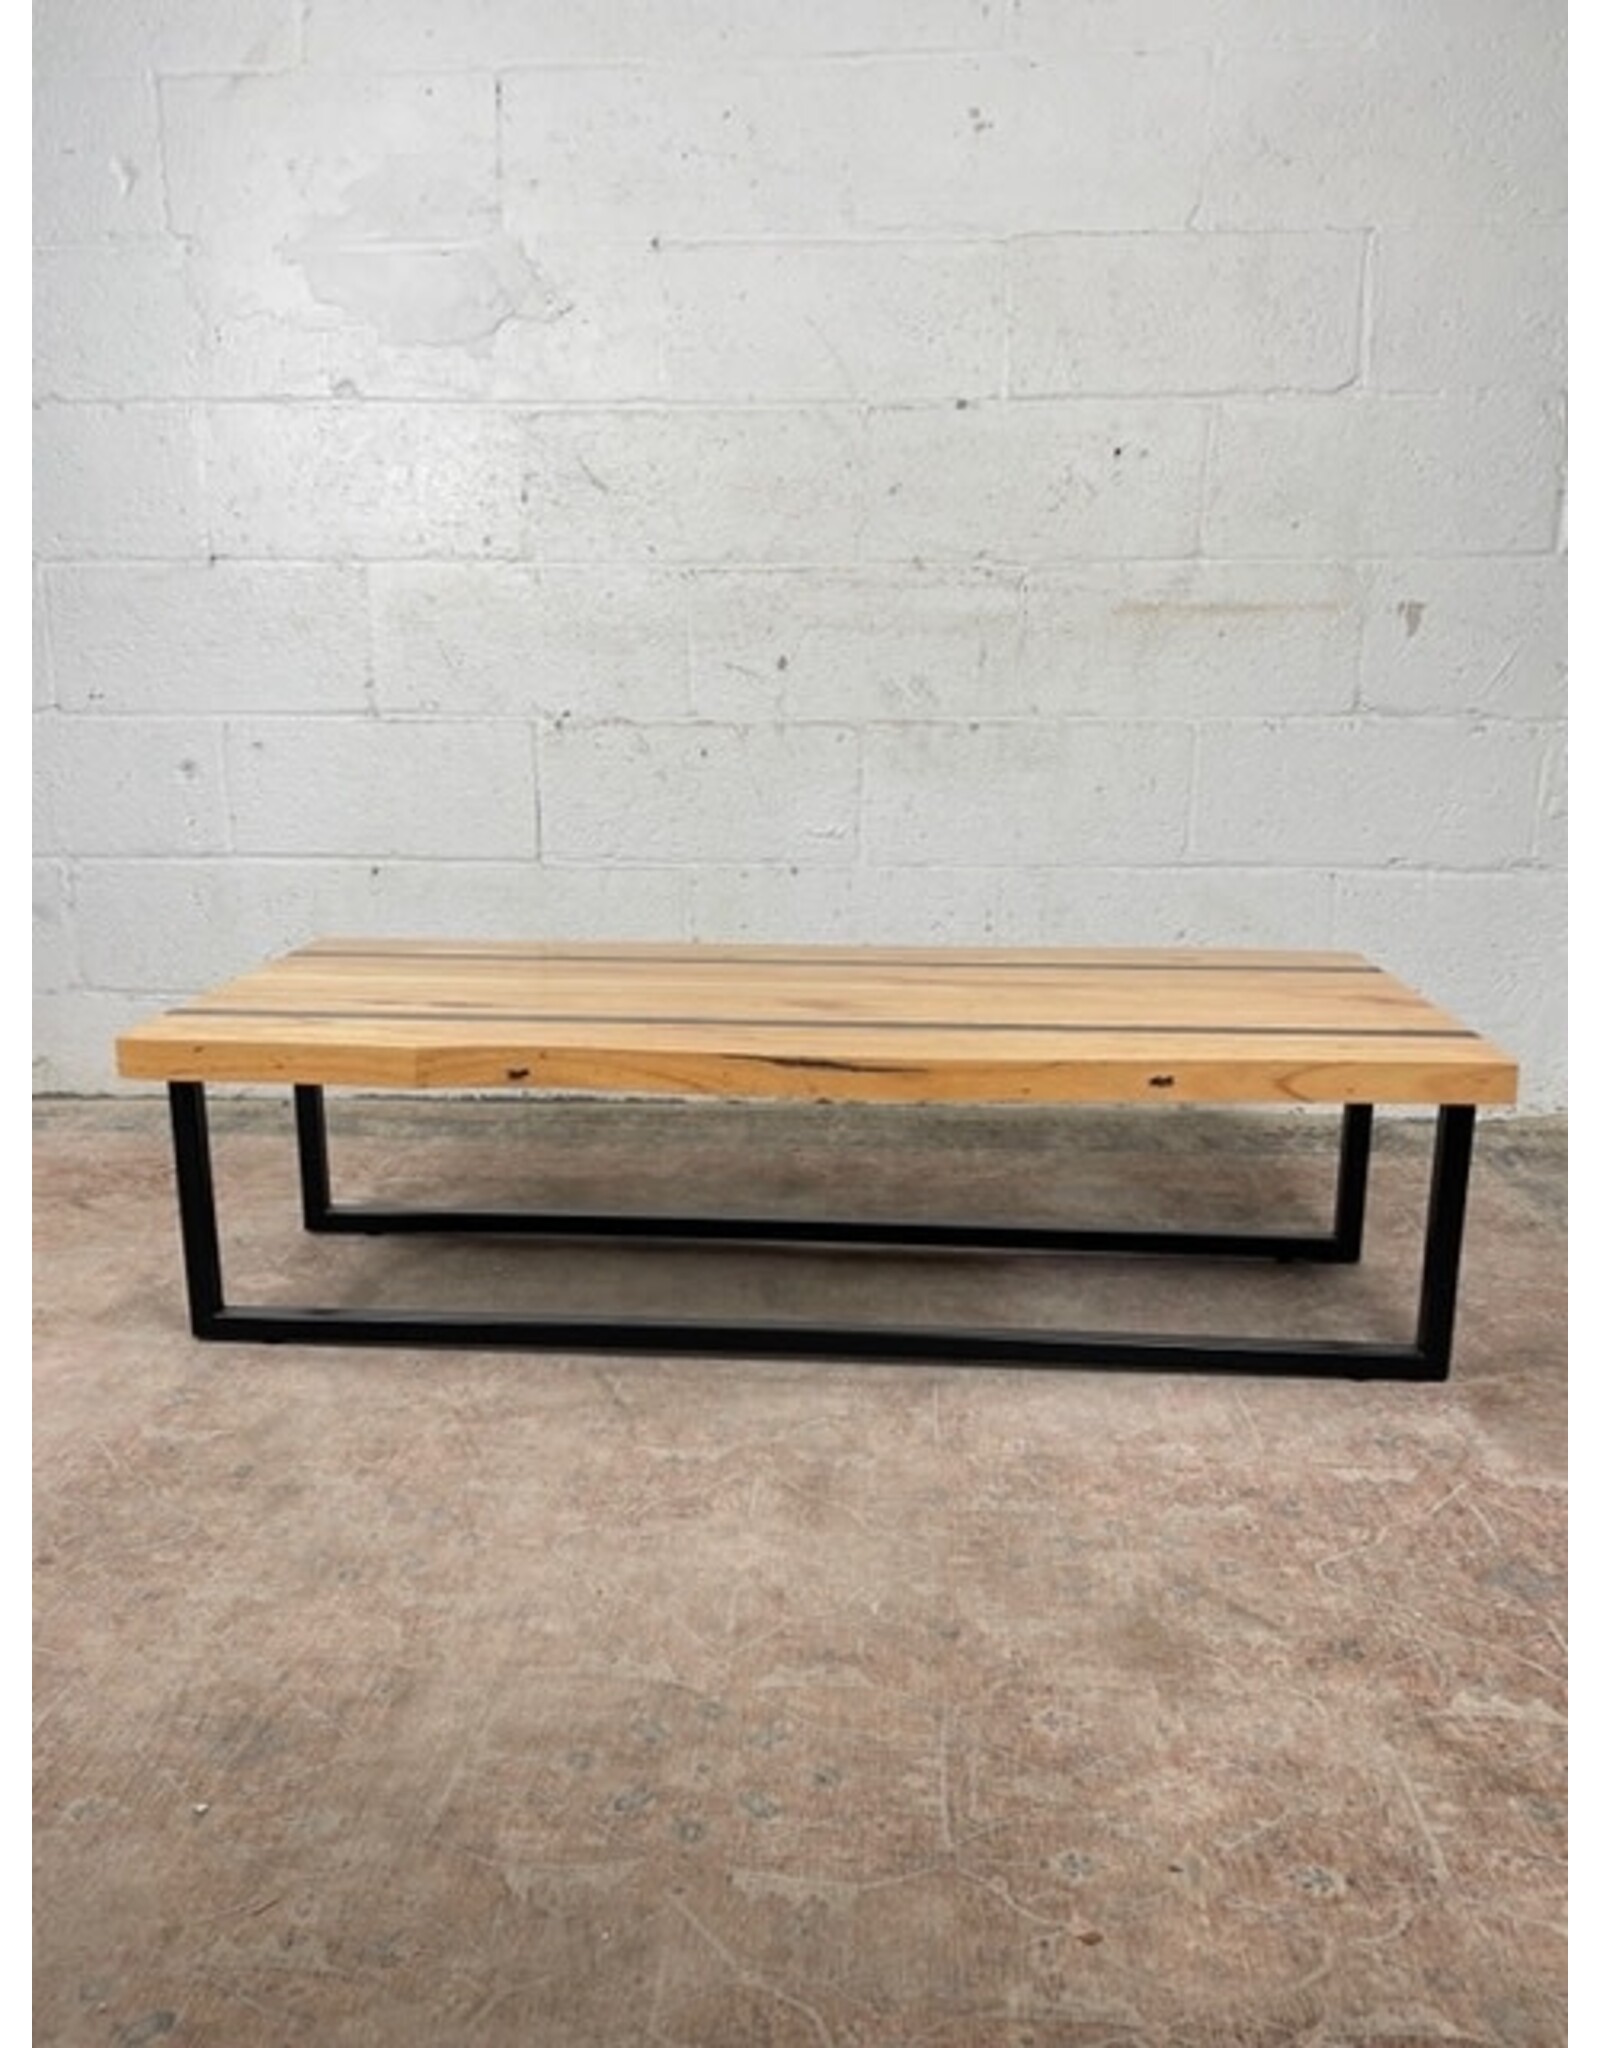 Wooden Coffee Table with Metal legs